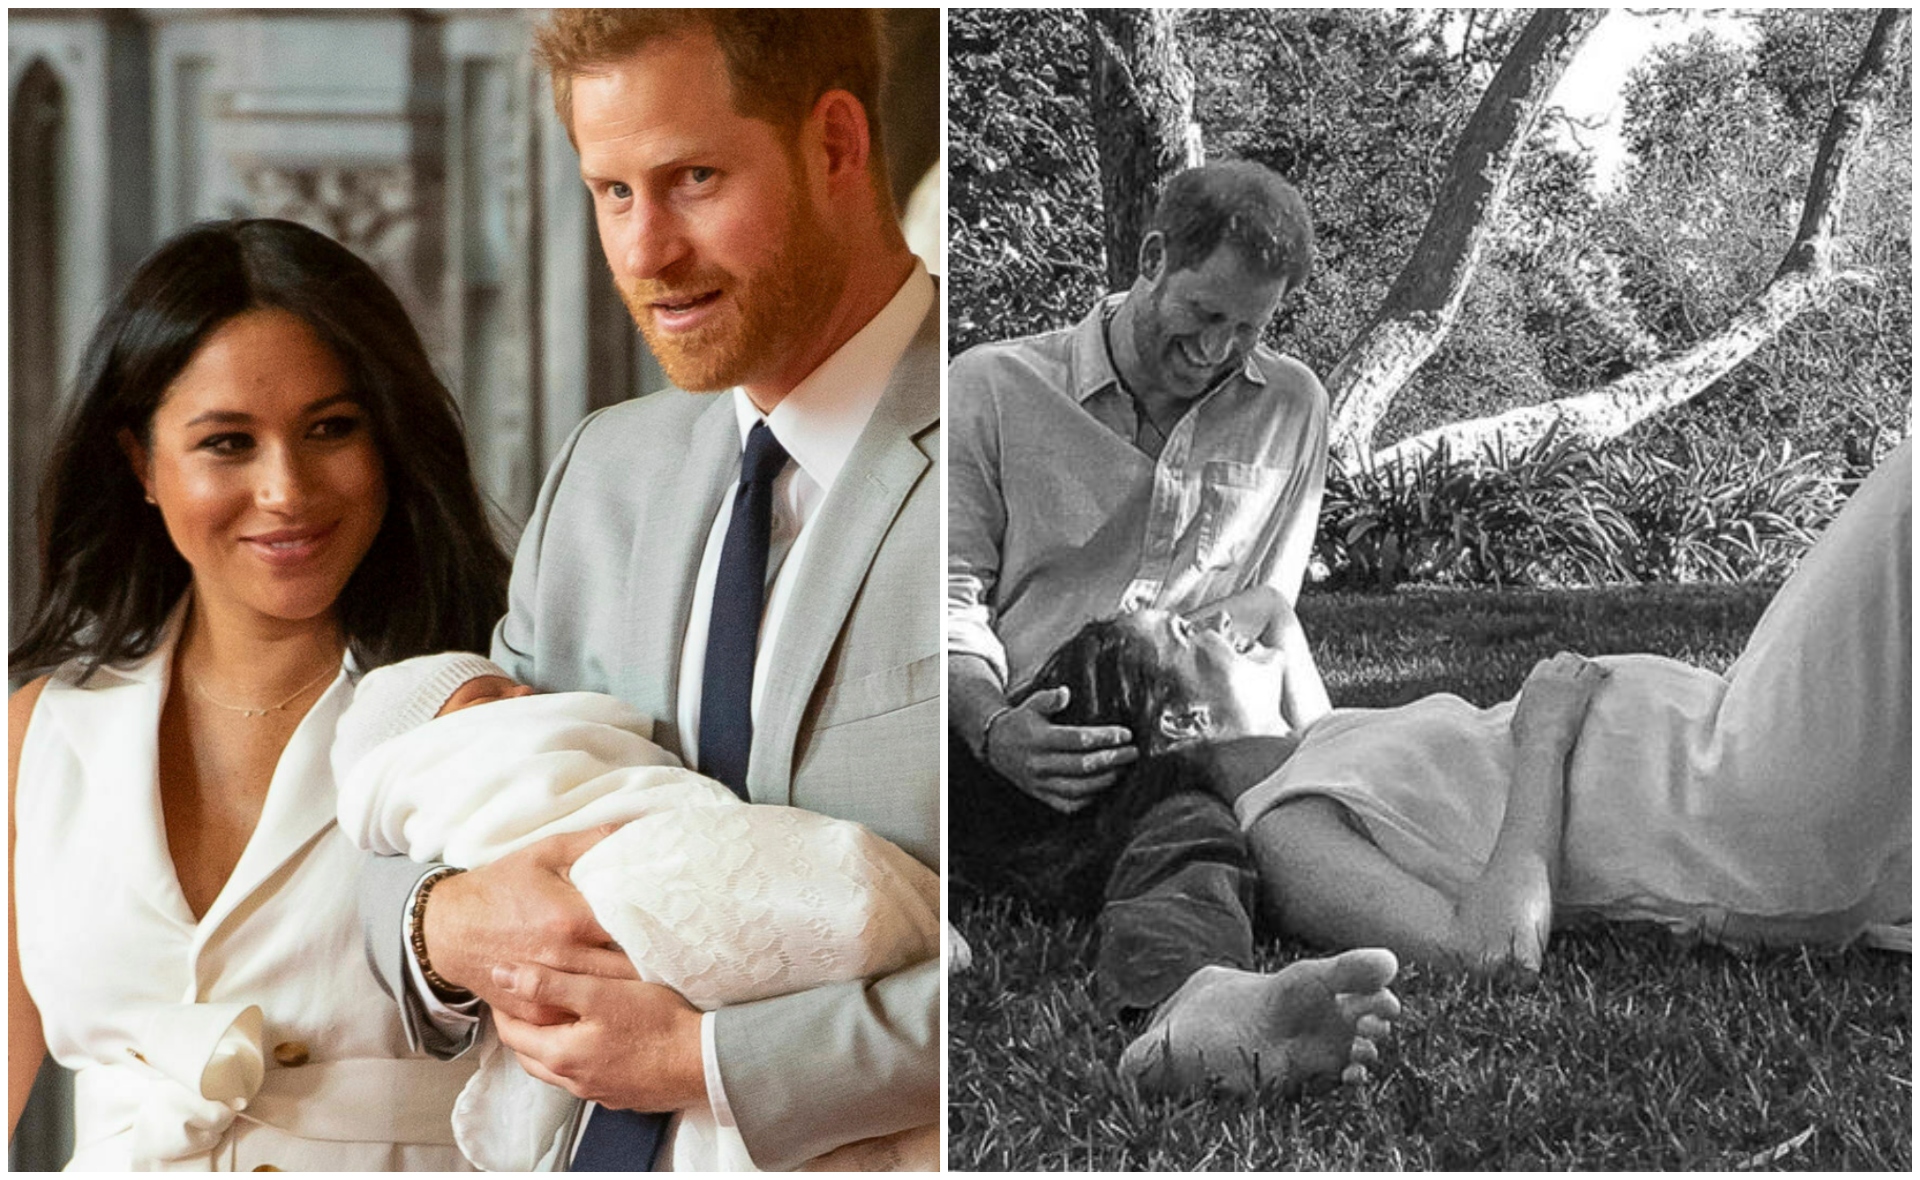 Duchess Meghan’s stunning custom-made dress from her second pregnancy photoshoot paid a subtle-yet-special tribute to her first child, Archie